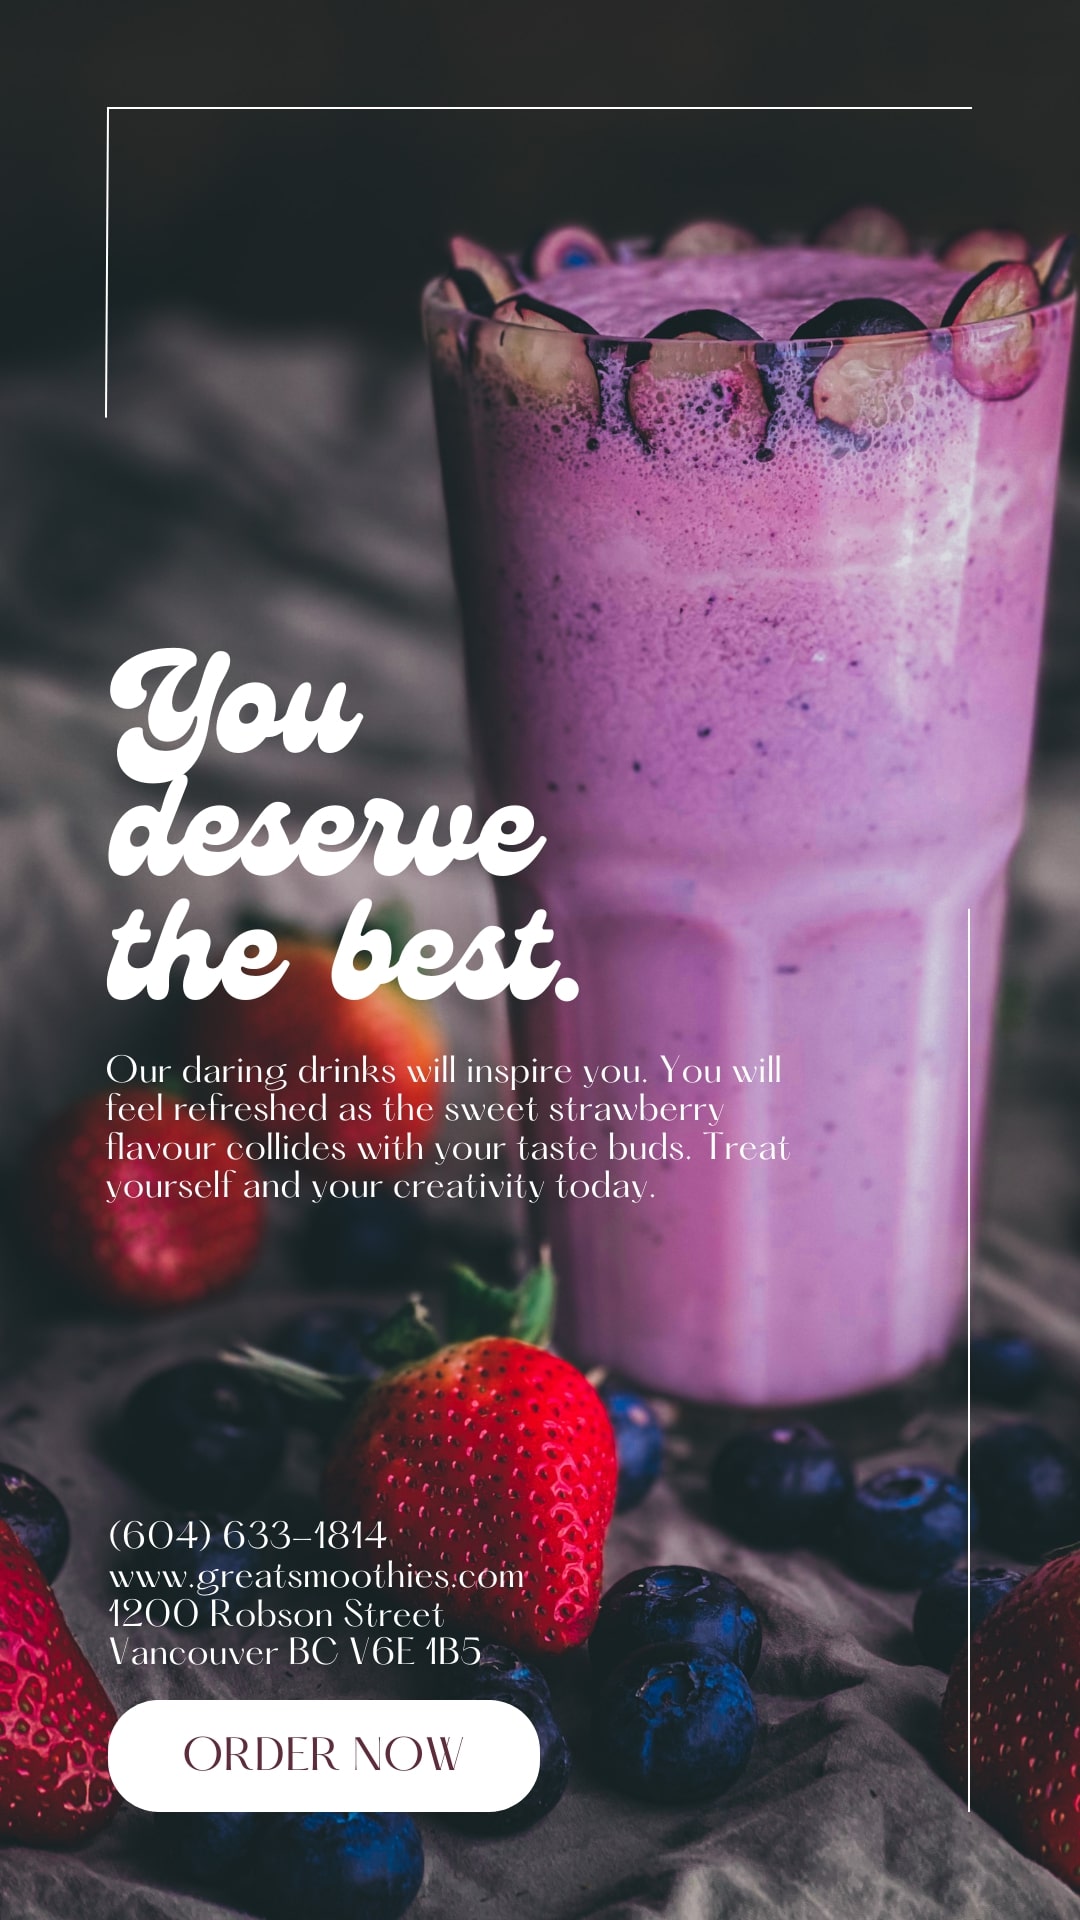 a speculative ad for a smoothie company